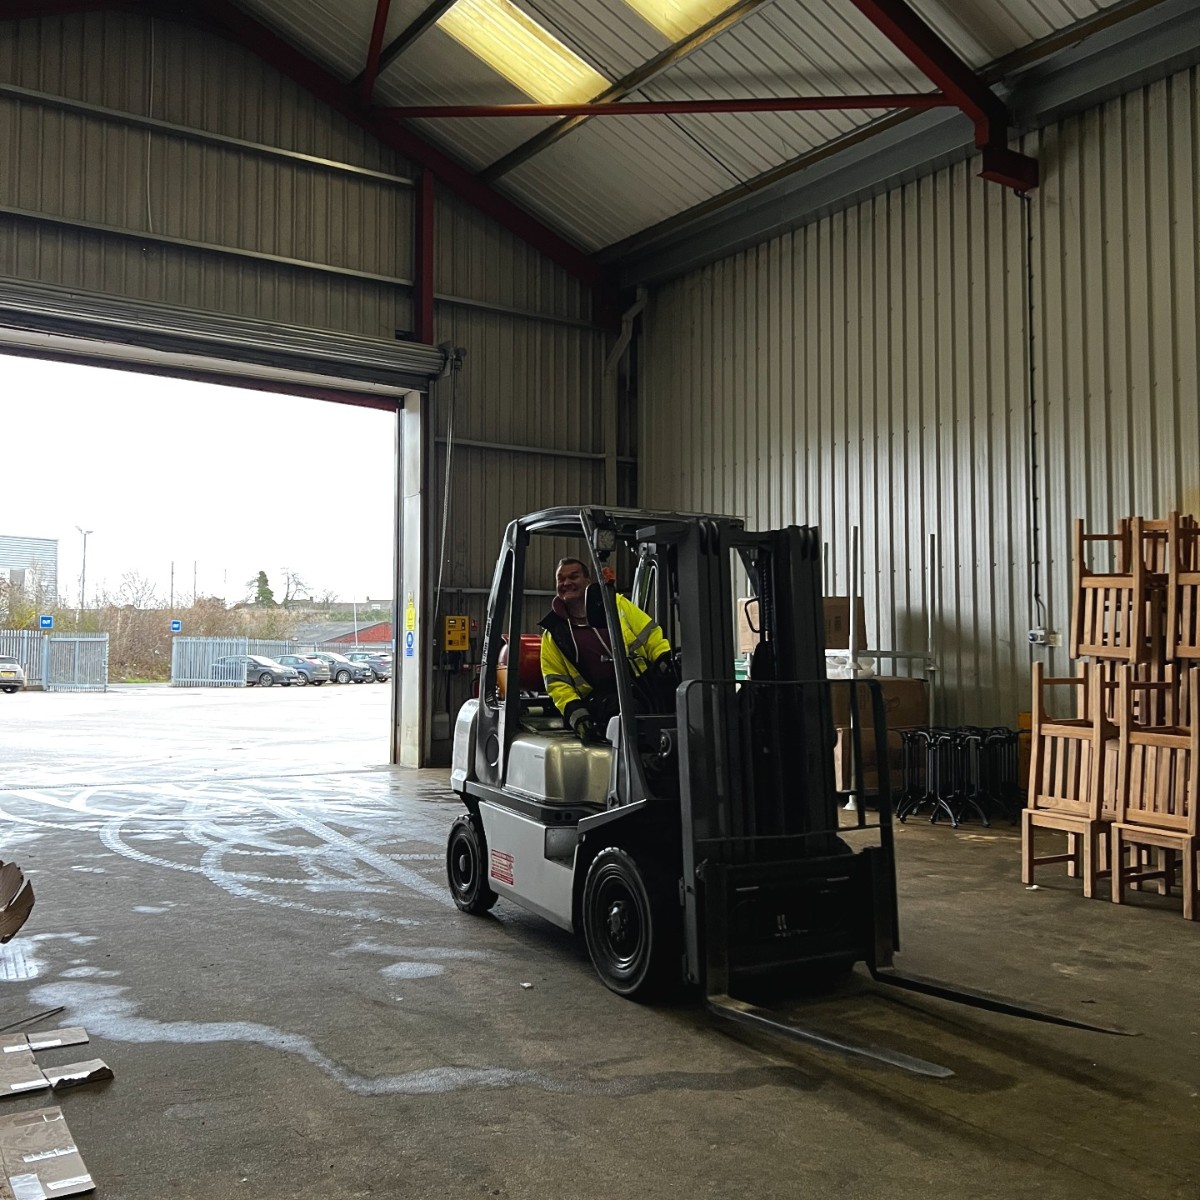 Pete working hard in our warehouse today!🚚

We've had a busy flow of deliveries leaving LeisureBench this week with lots of customers upgrading their garden furniture for spring 🌷🌿

#Furniture #CommercialFurniture #BespokeFurniture #OutdoorFurniture #Staff